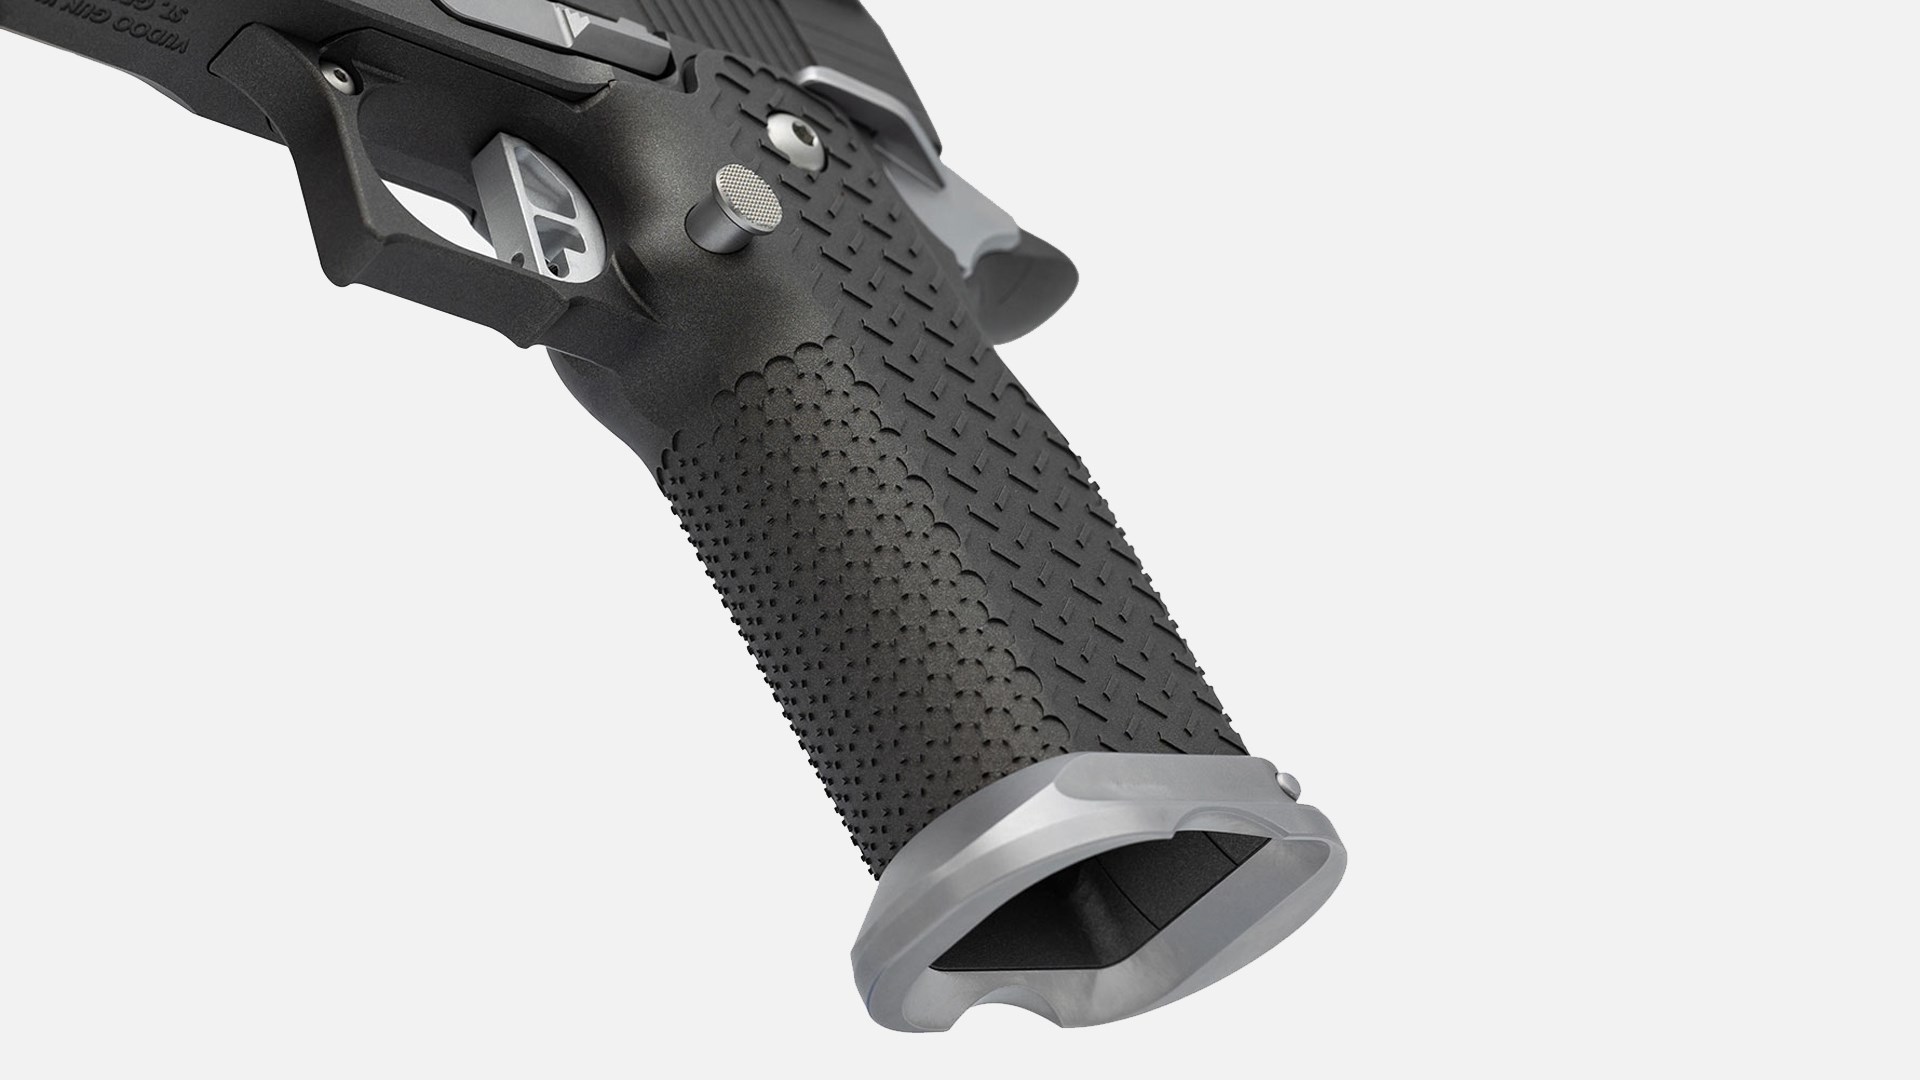 A close-up of the double-stack magazine well on the all-black Vudoo Priest pistol.